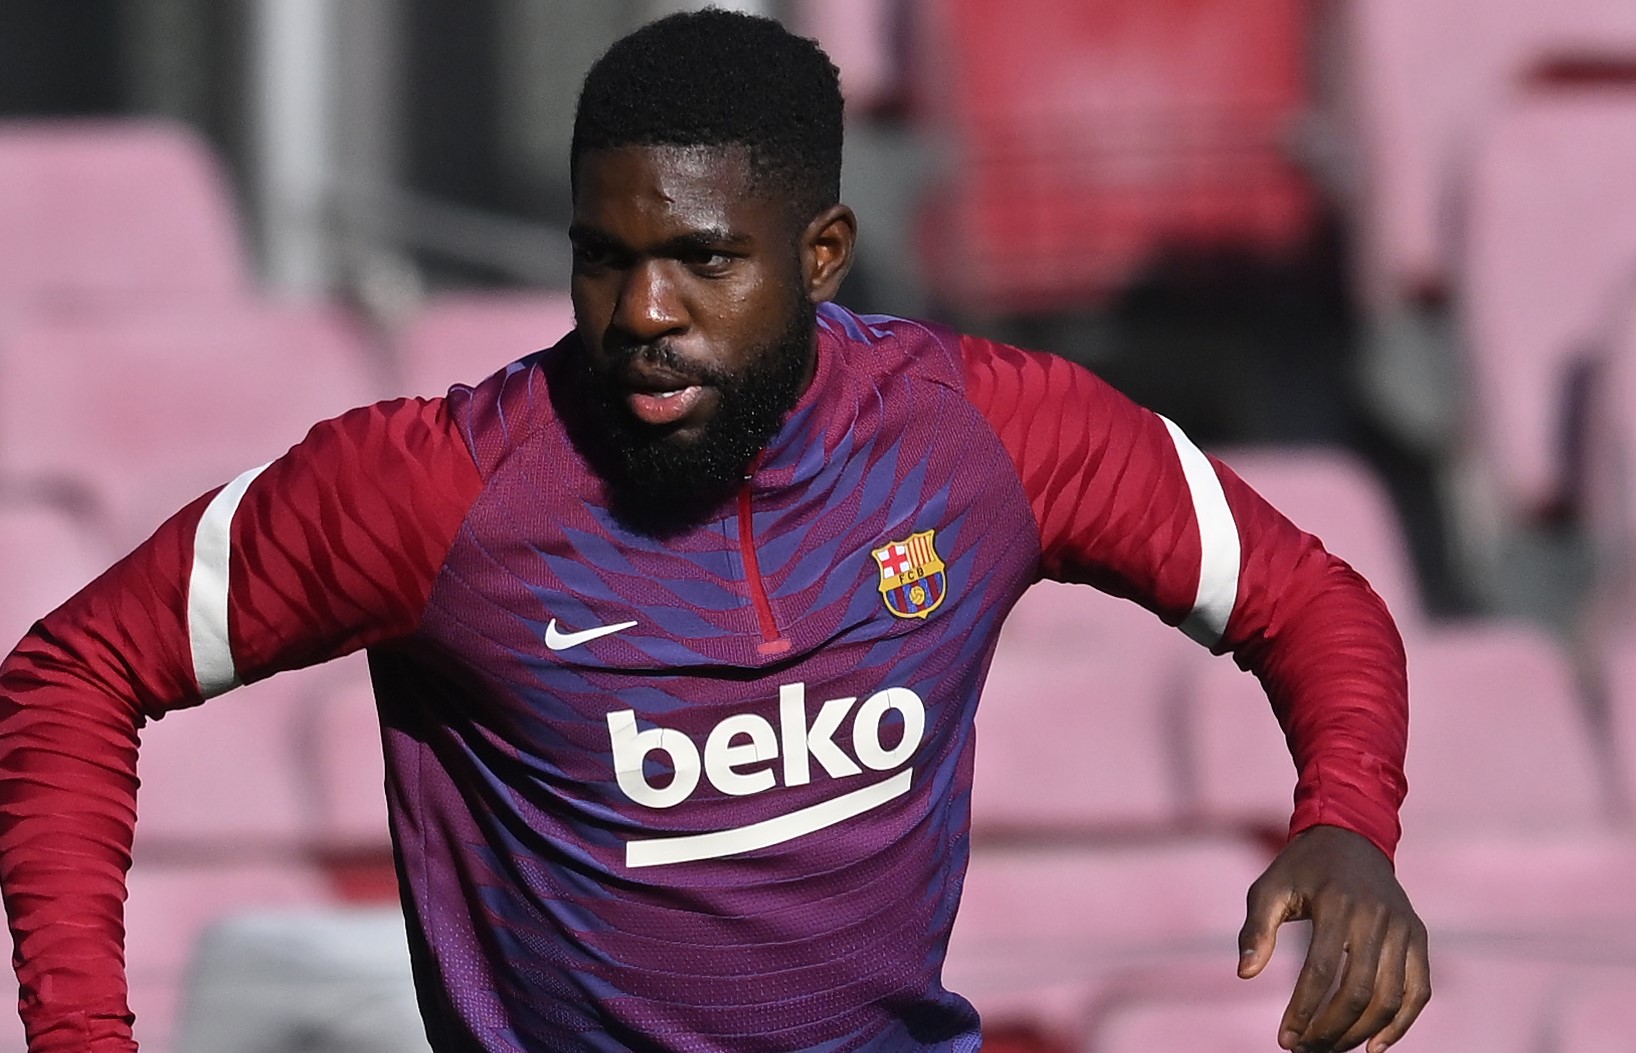 Barcelona have their work cut out with Umtiti amid Torres issues